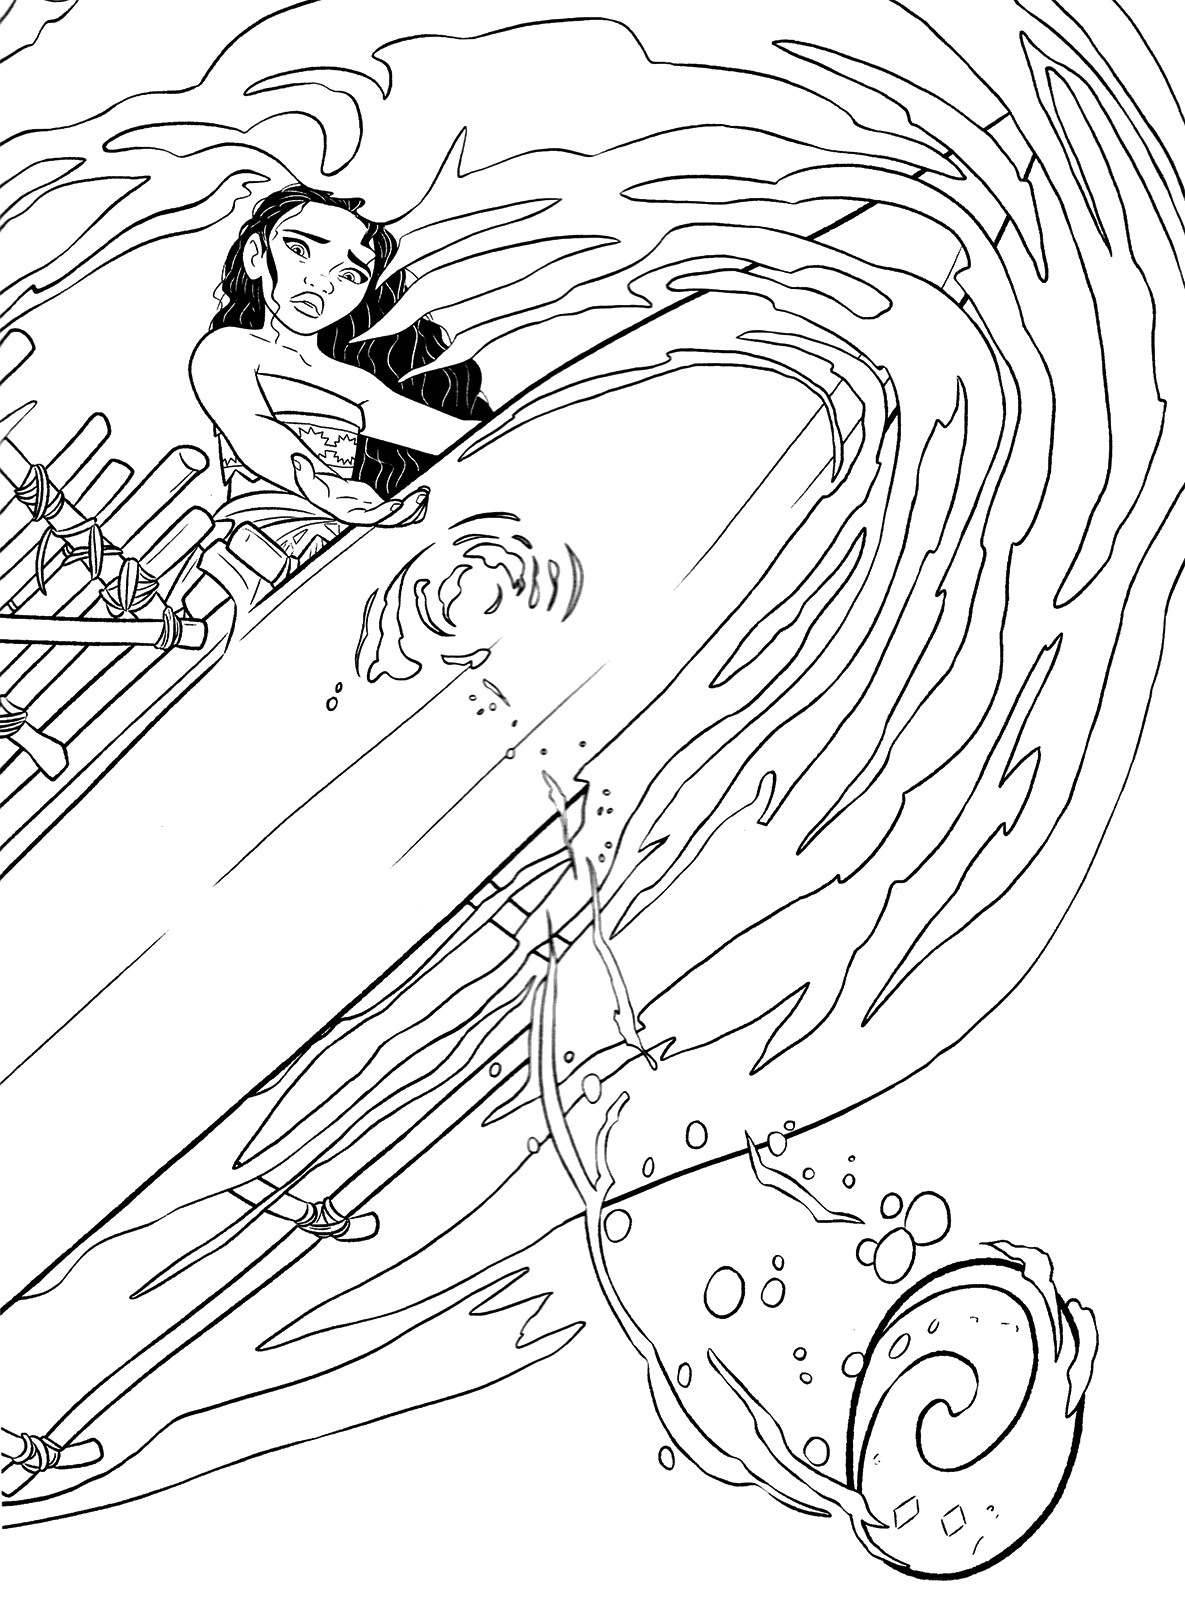 Coloring Pages For Kids Moana
 Moana Coloring Pages Best Coloring Pages For Kids